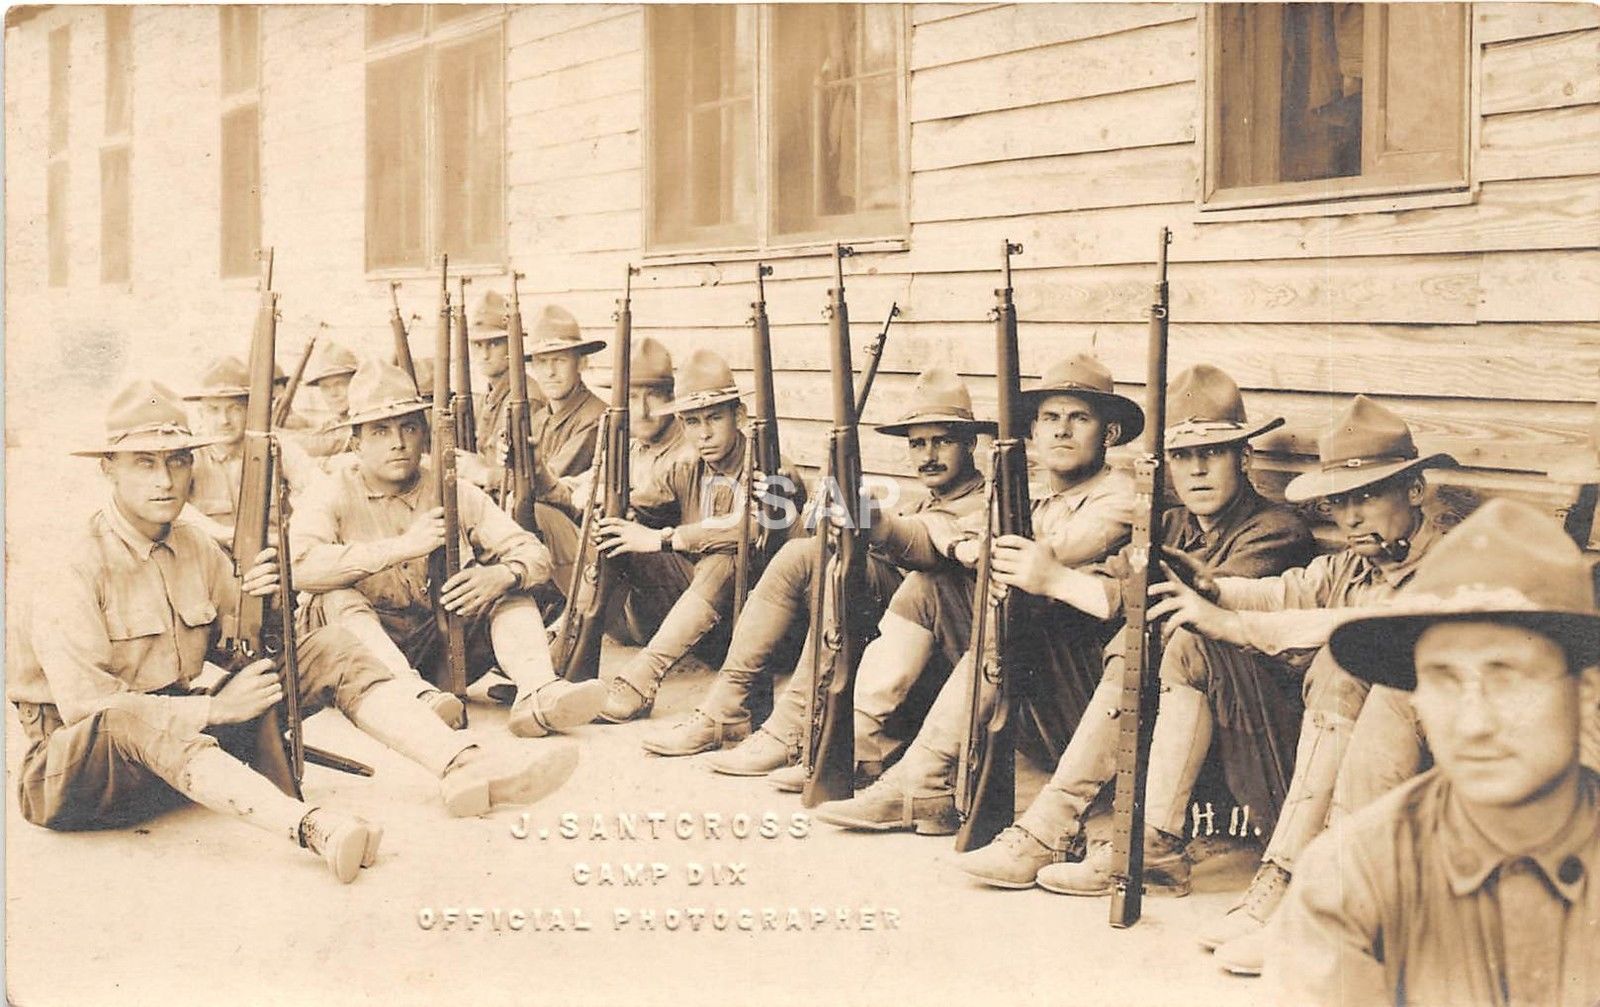 Camp Dix - soldiers seated holding rifles - c 1917